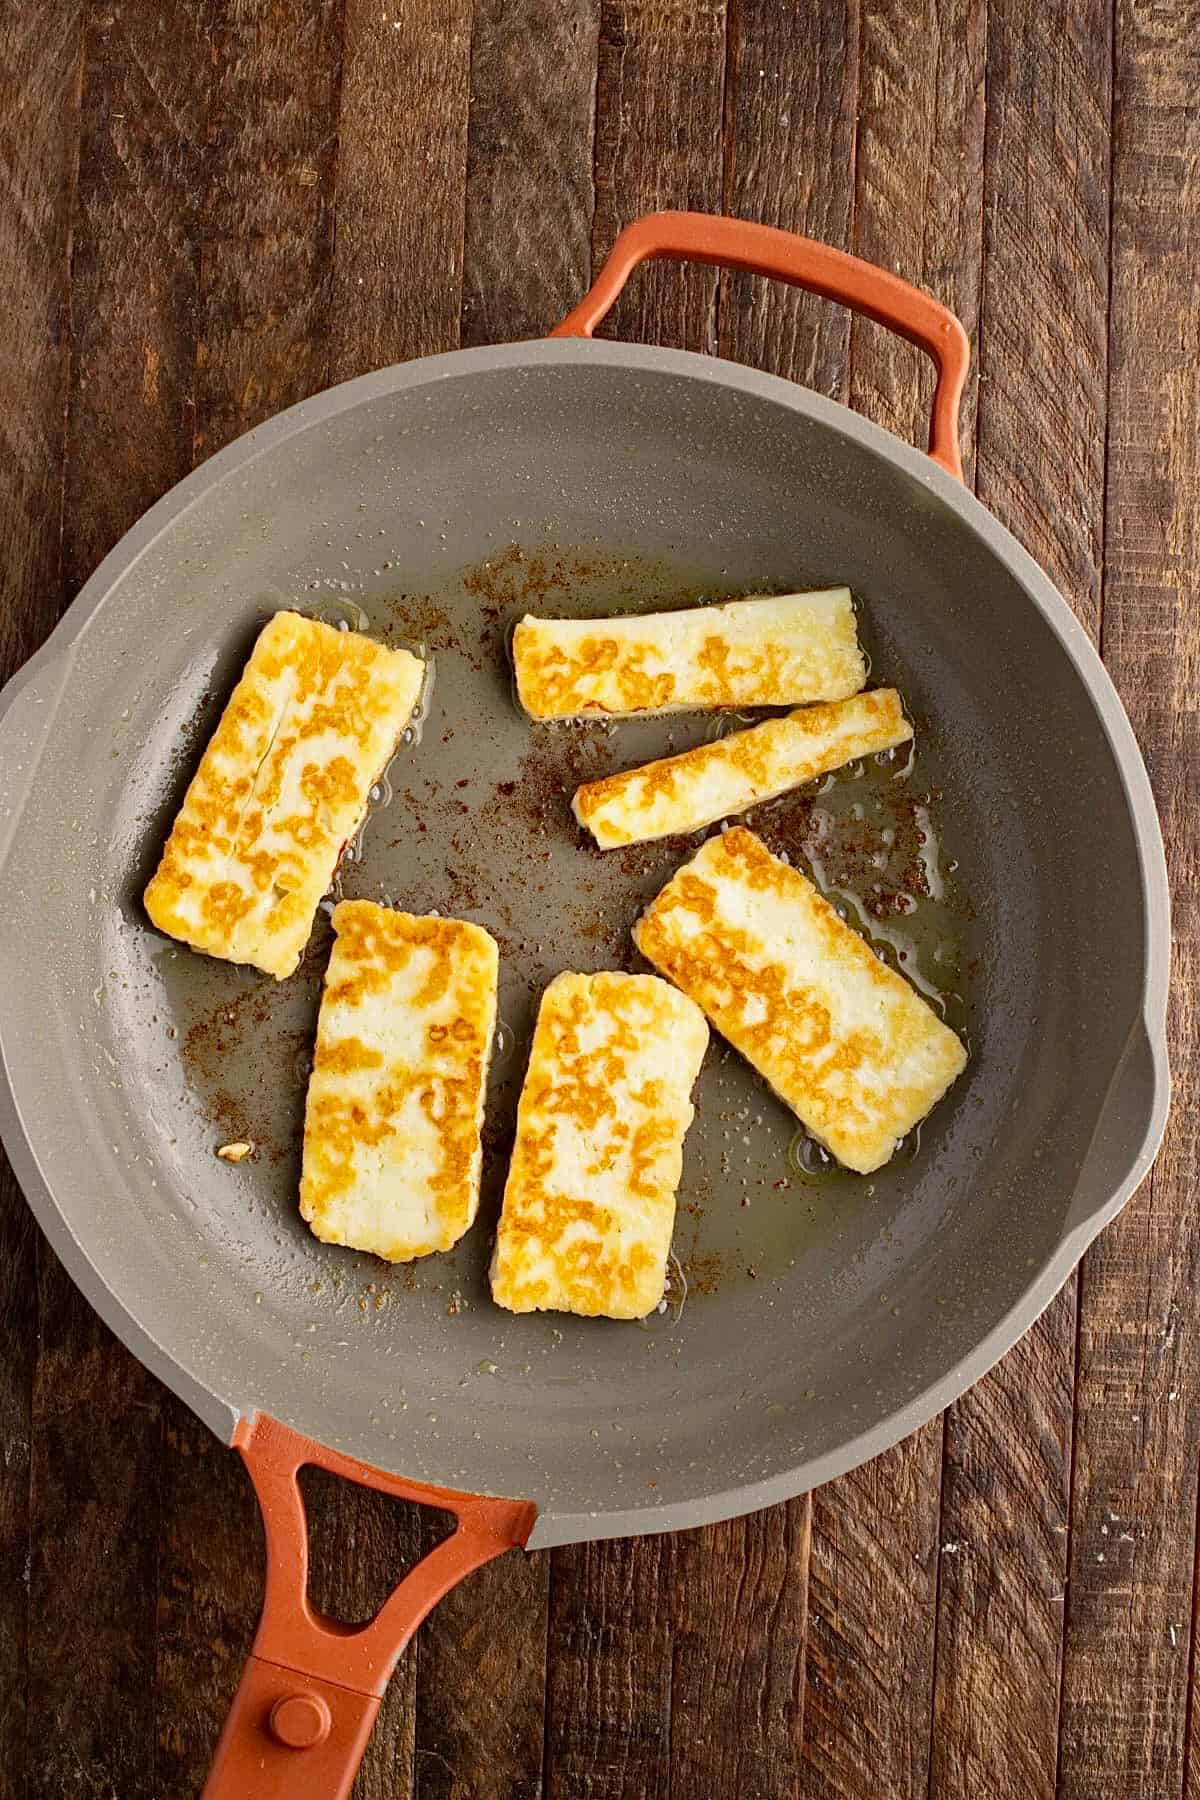 How to cook Halloumi cheese